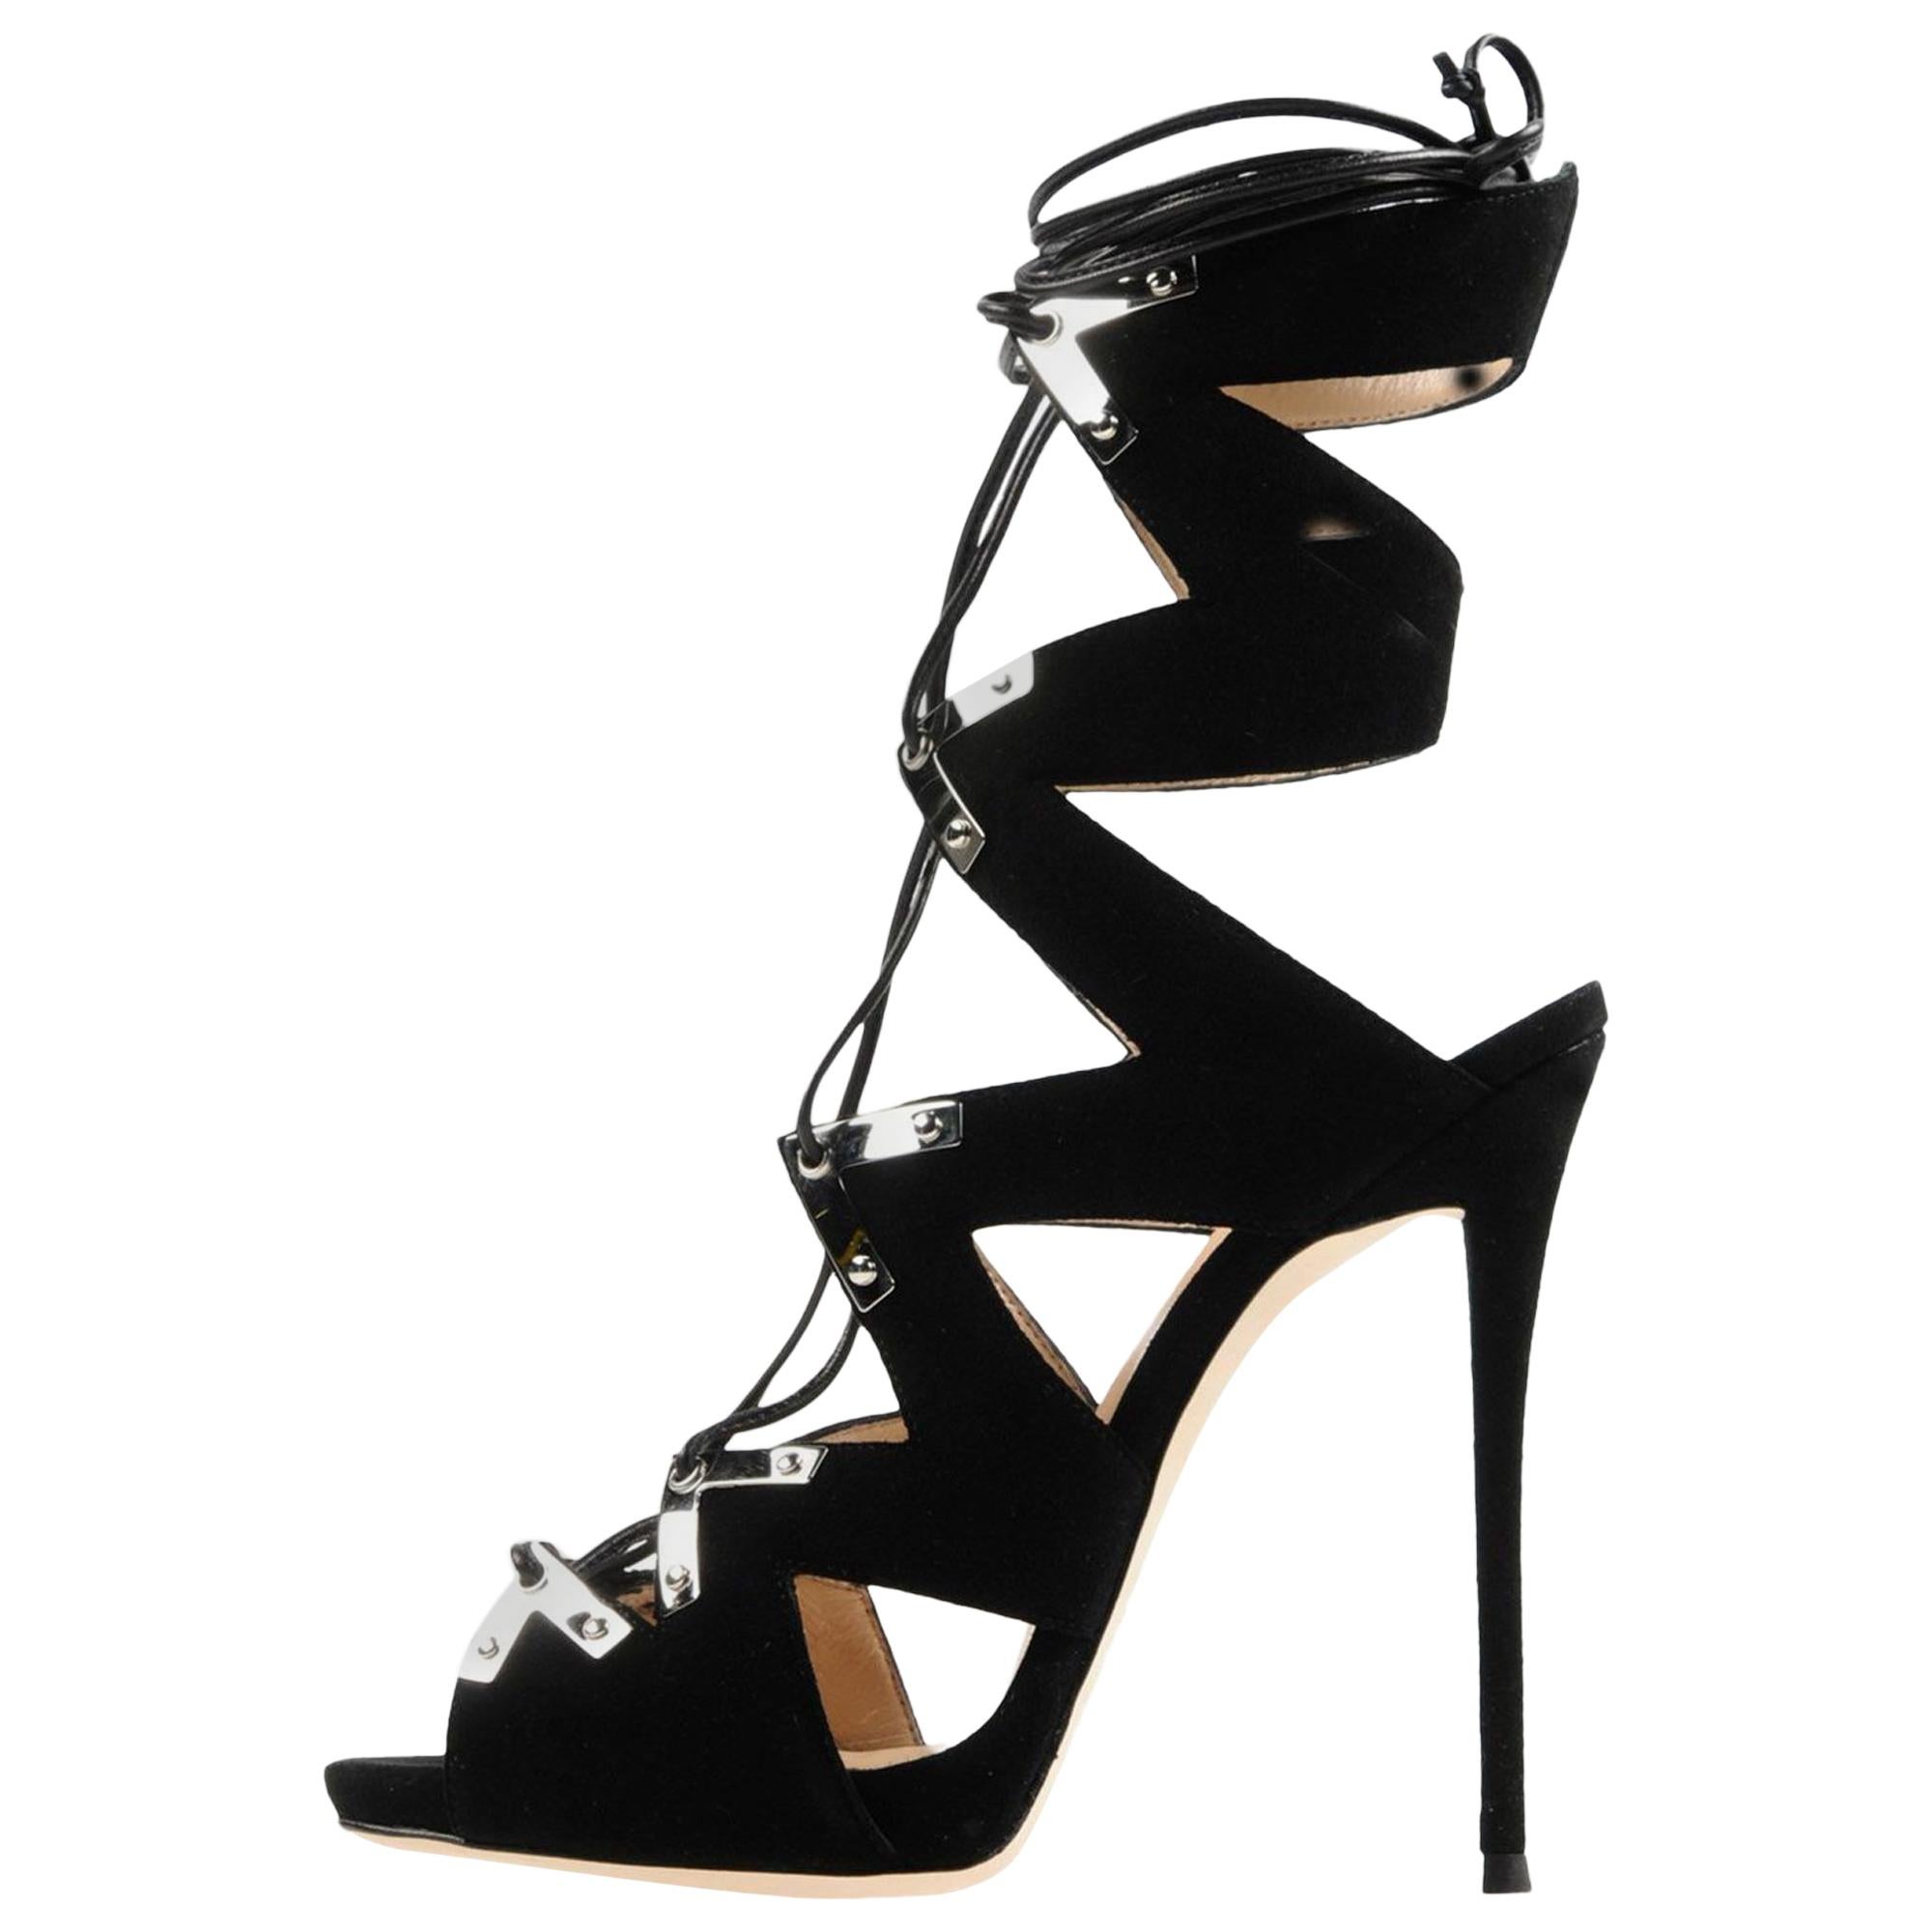 Giuseppe Zanotti NEW Black Suede Metal Cut Out Tie Up Evening Sandals Heels